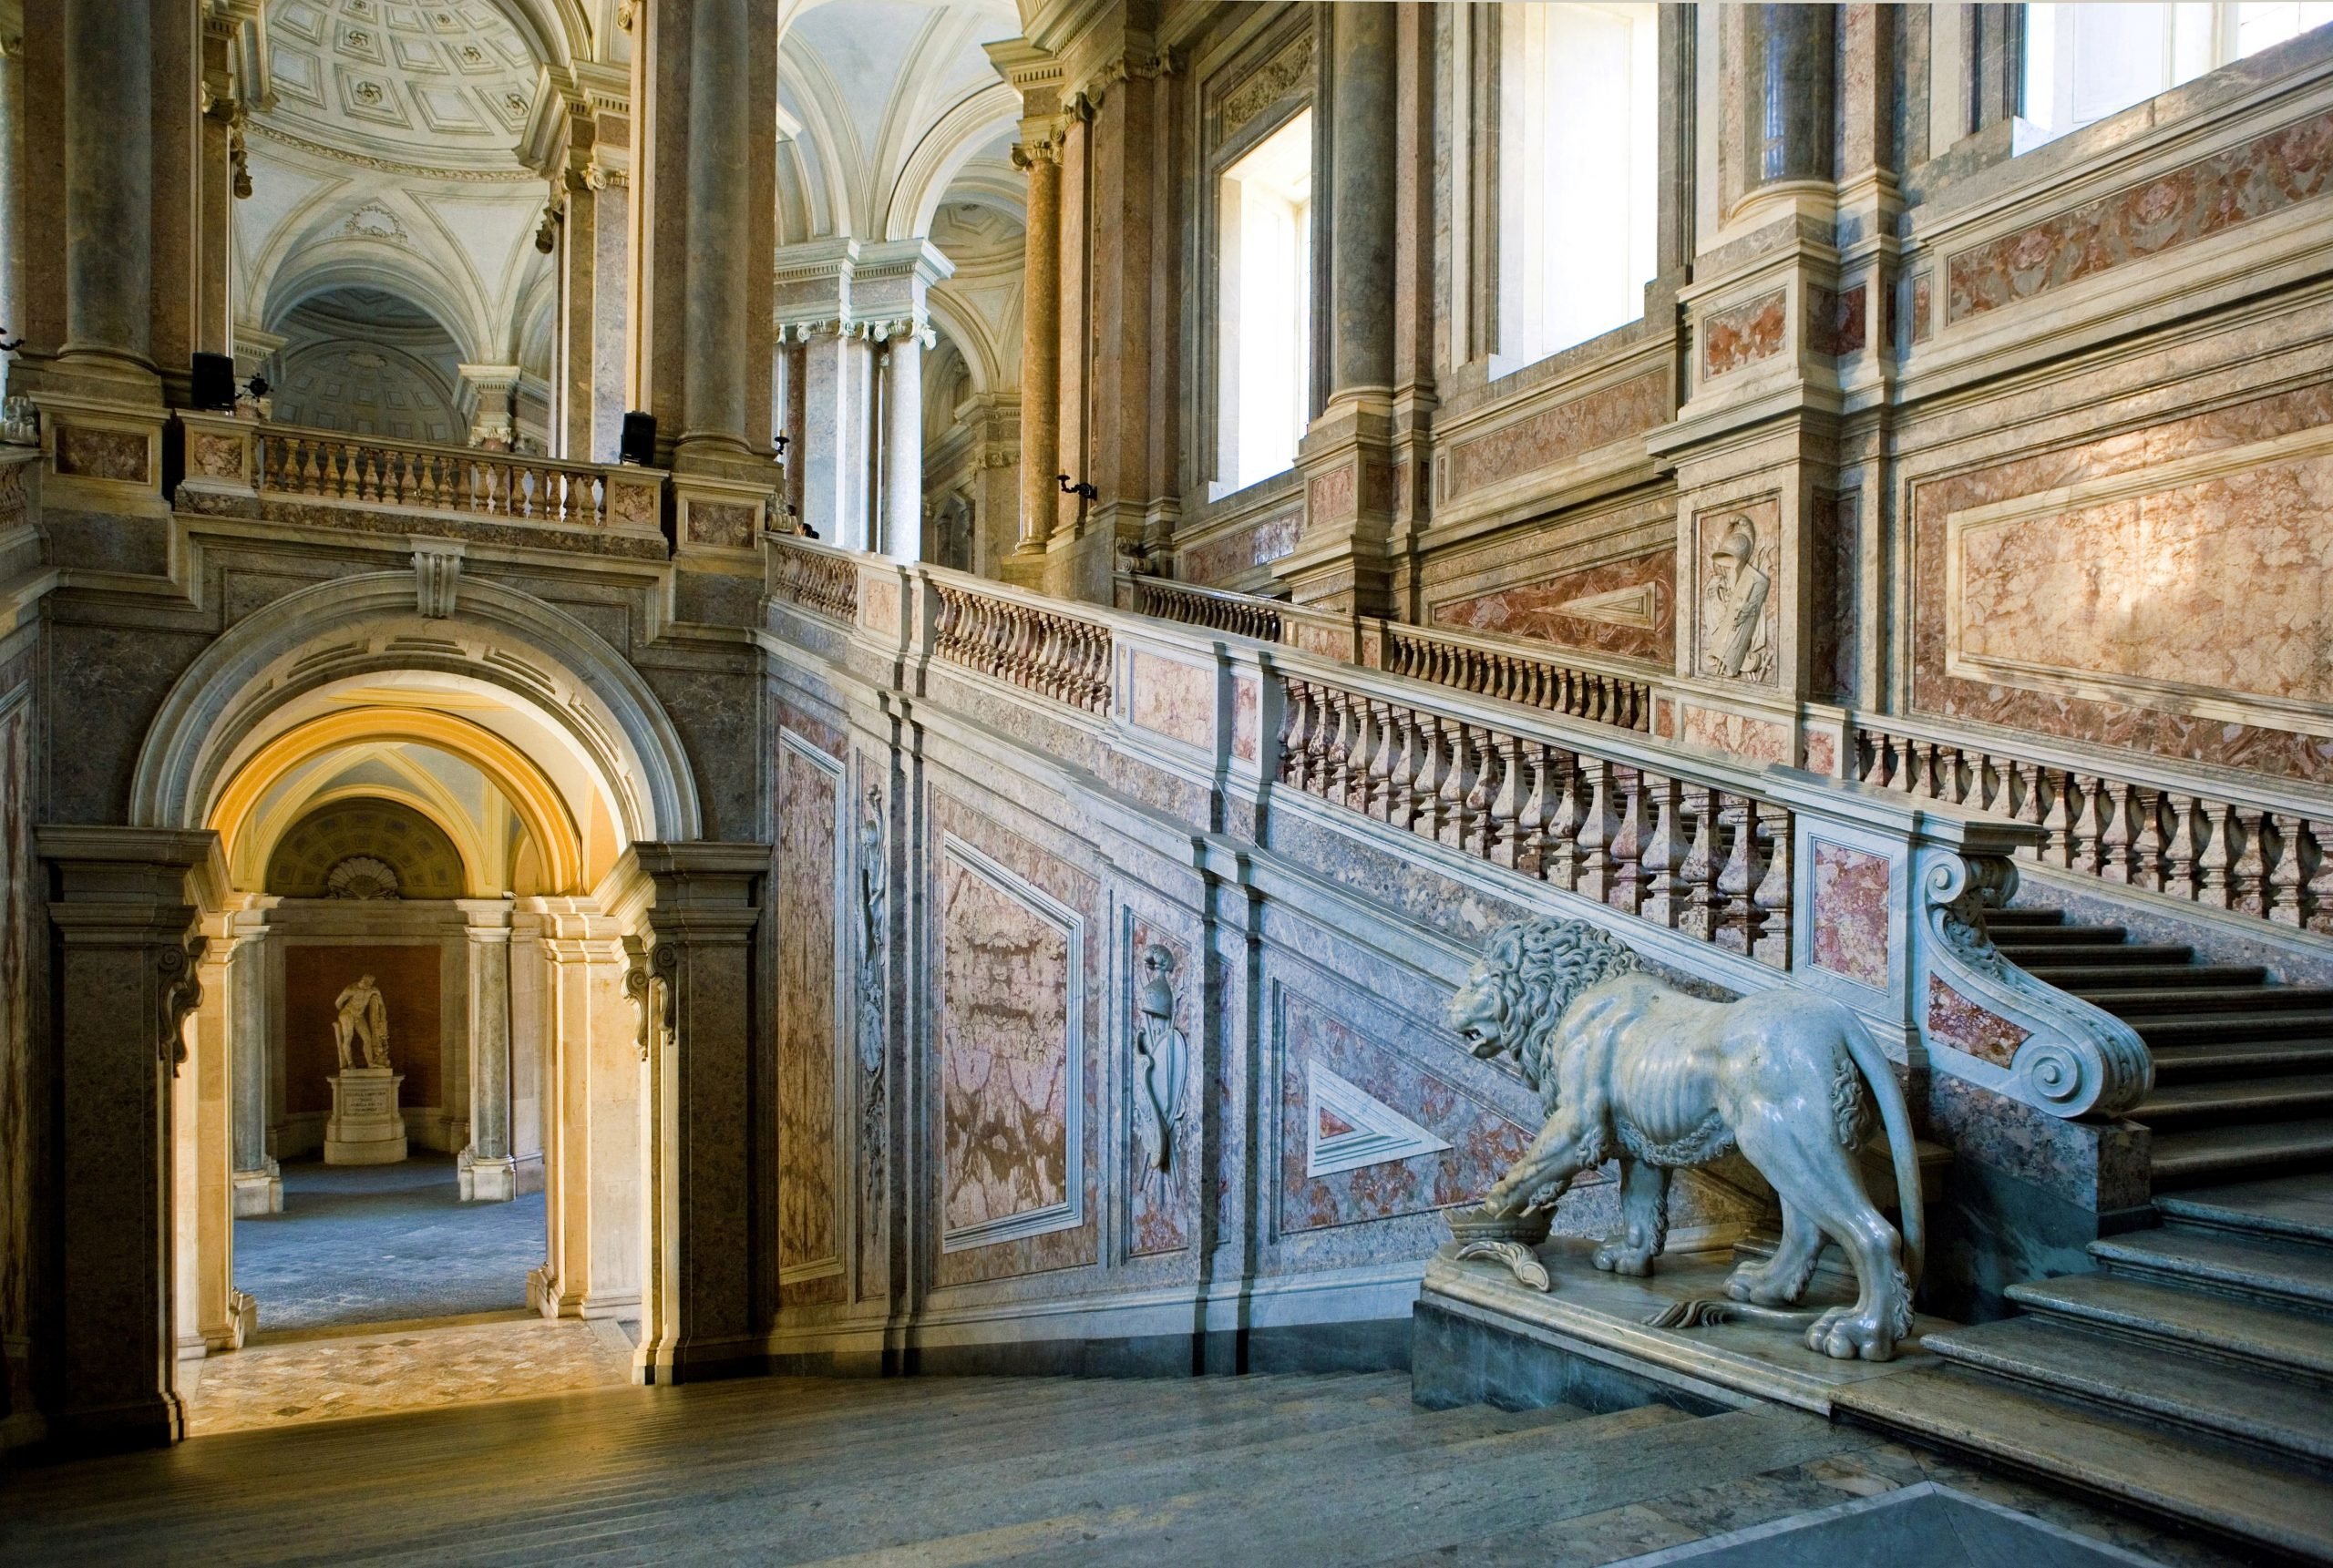 An interior in Italy's Royal Palace of Caserta. Photo by Giuseppe Masci/AGF/Universal Images Group via Getty Images.